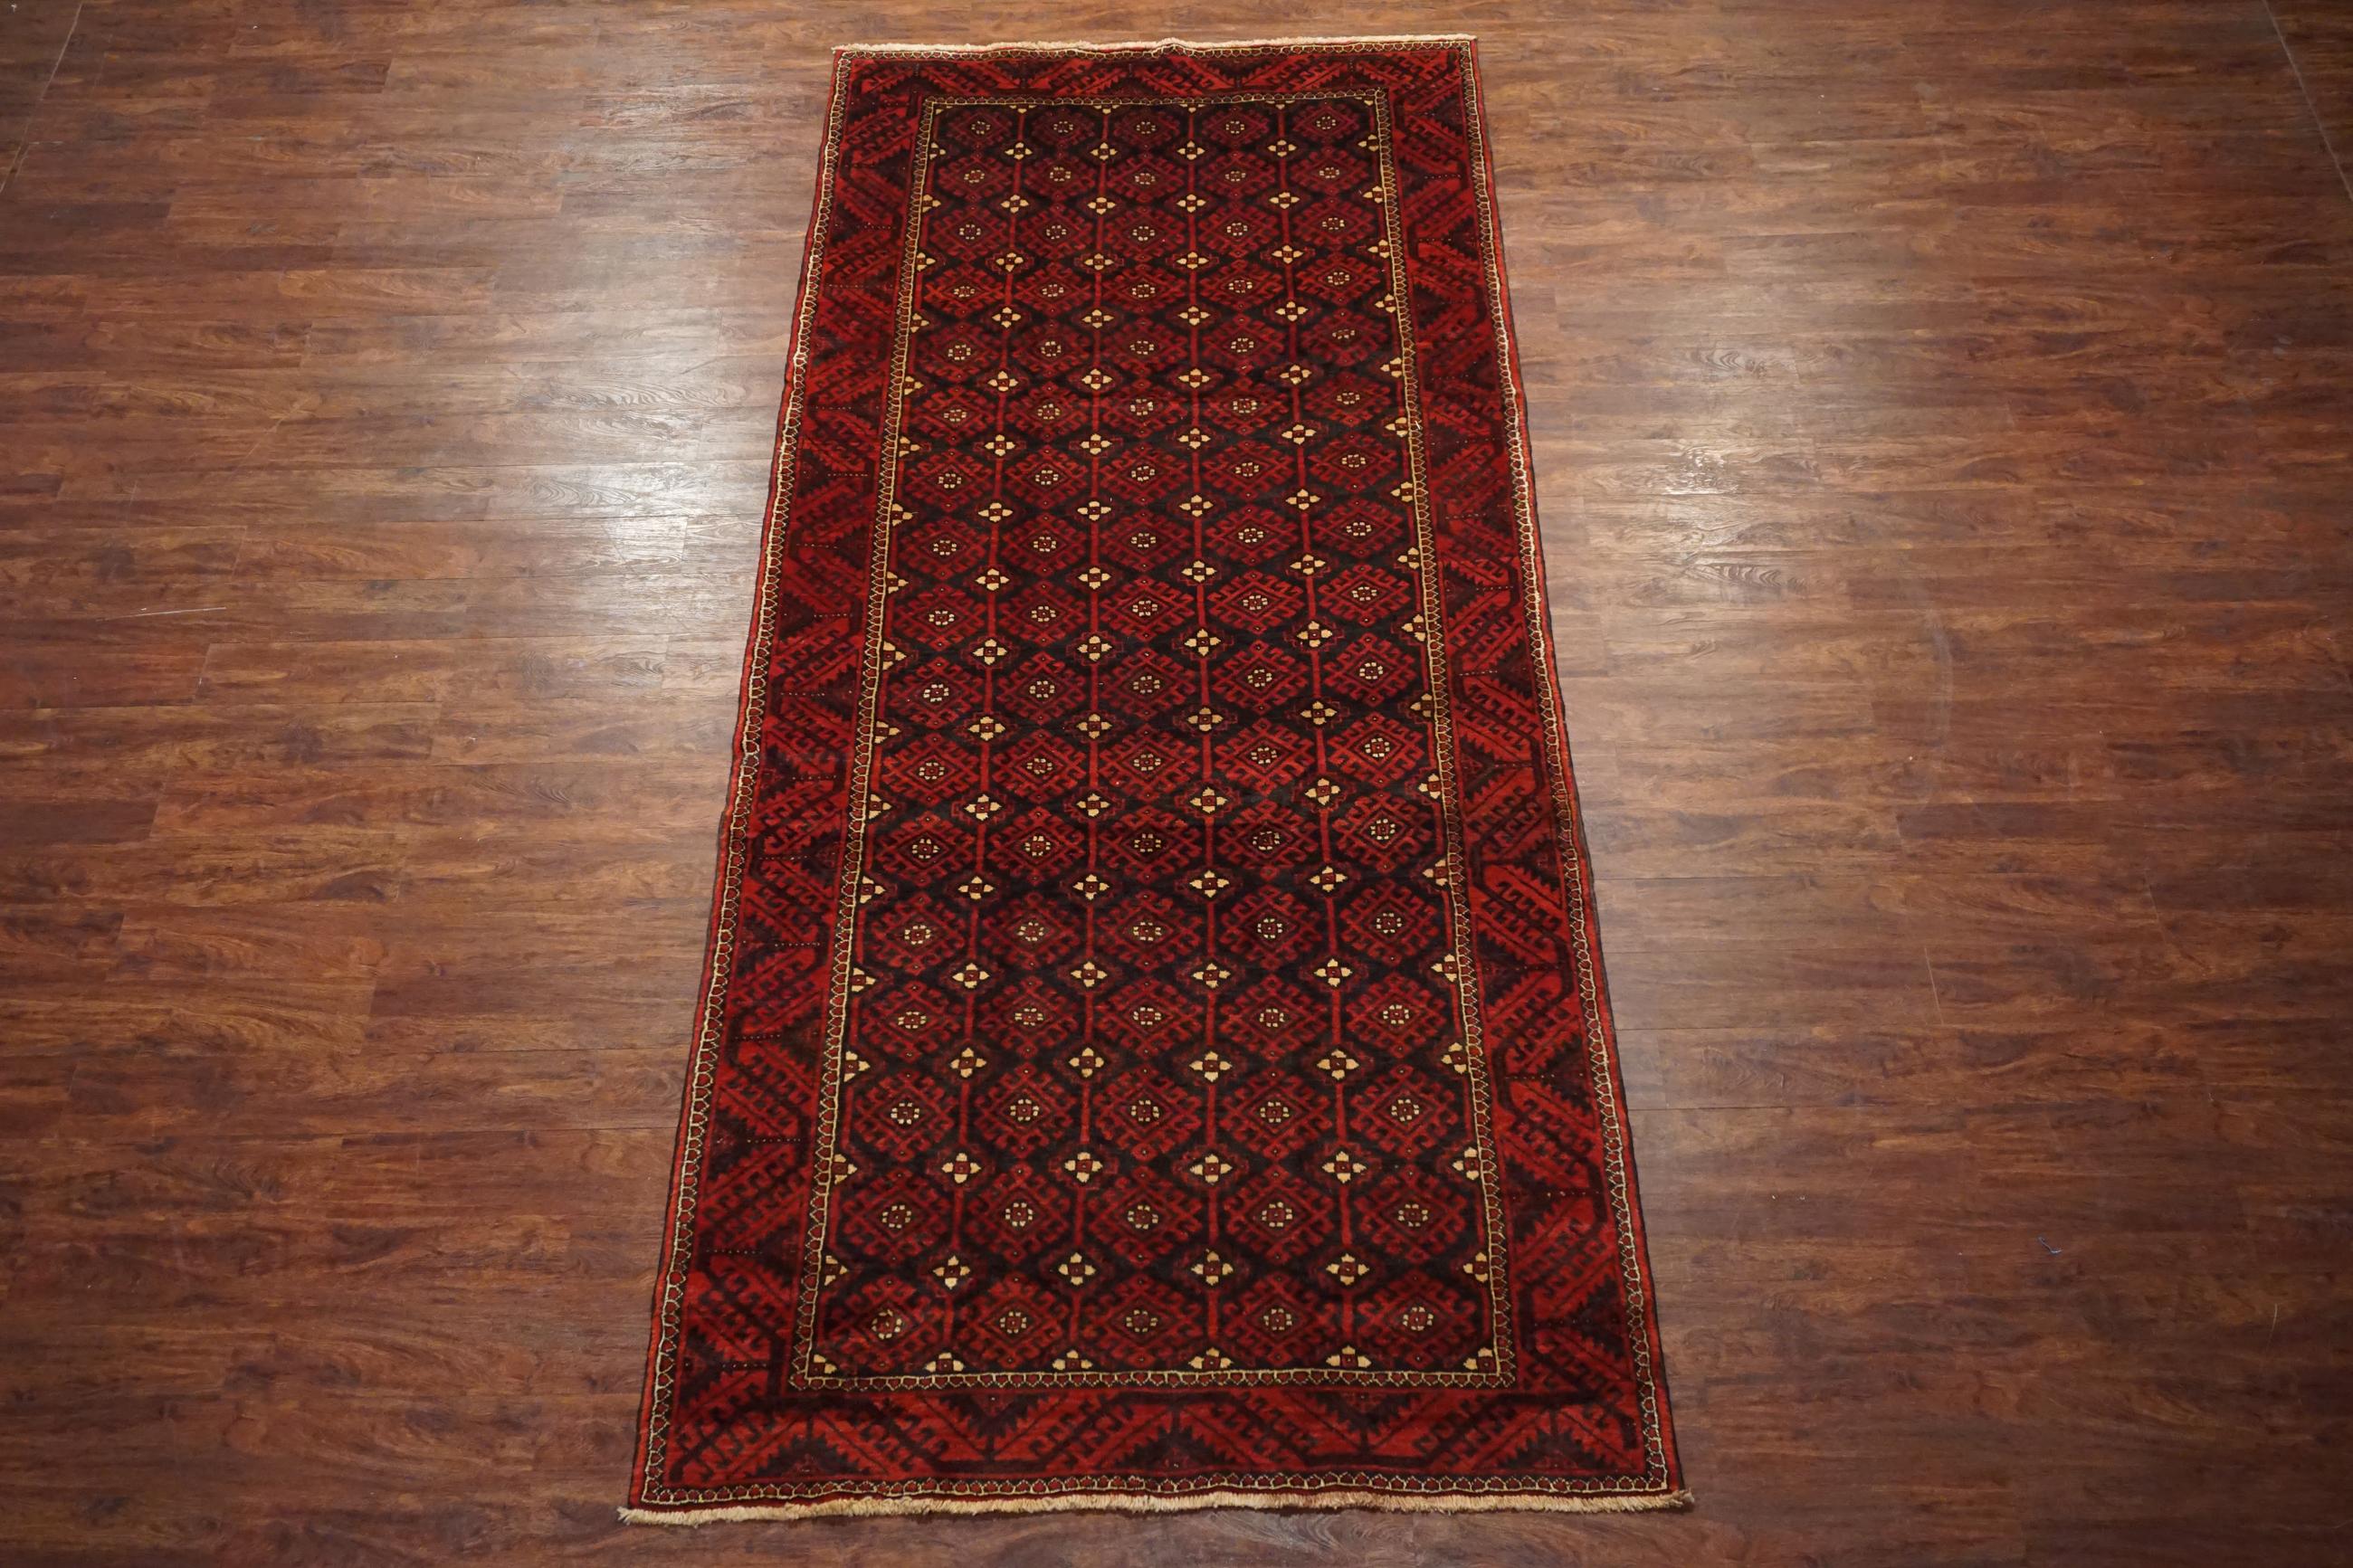 Hand-knotted, abrash wool pile on a cotton foundation.

Circa 1900

Dimensions: 5'3